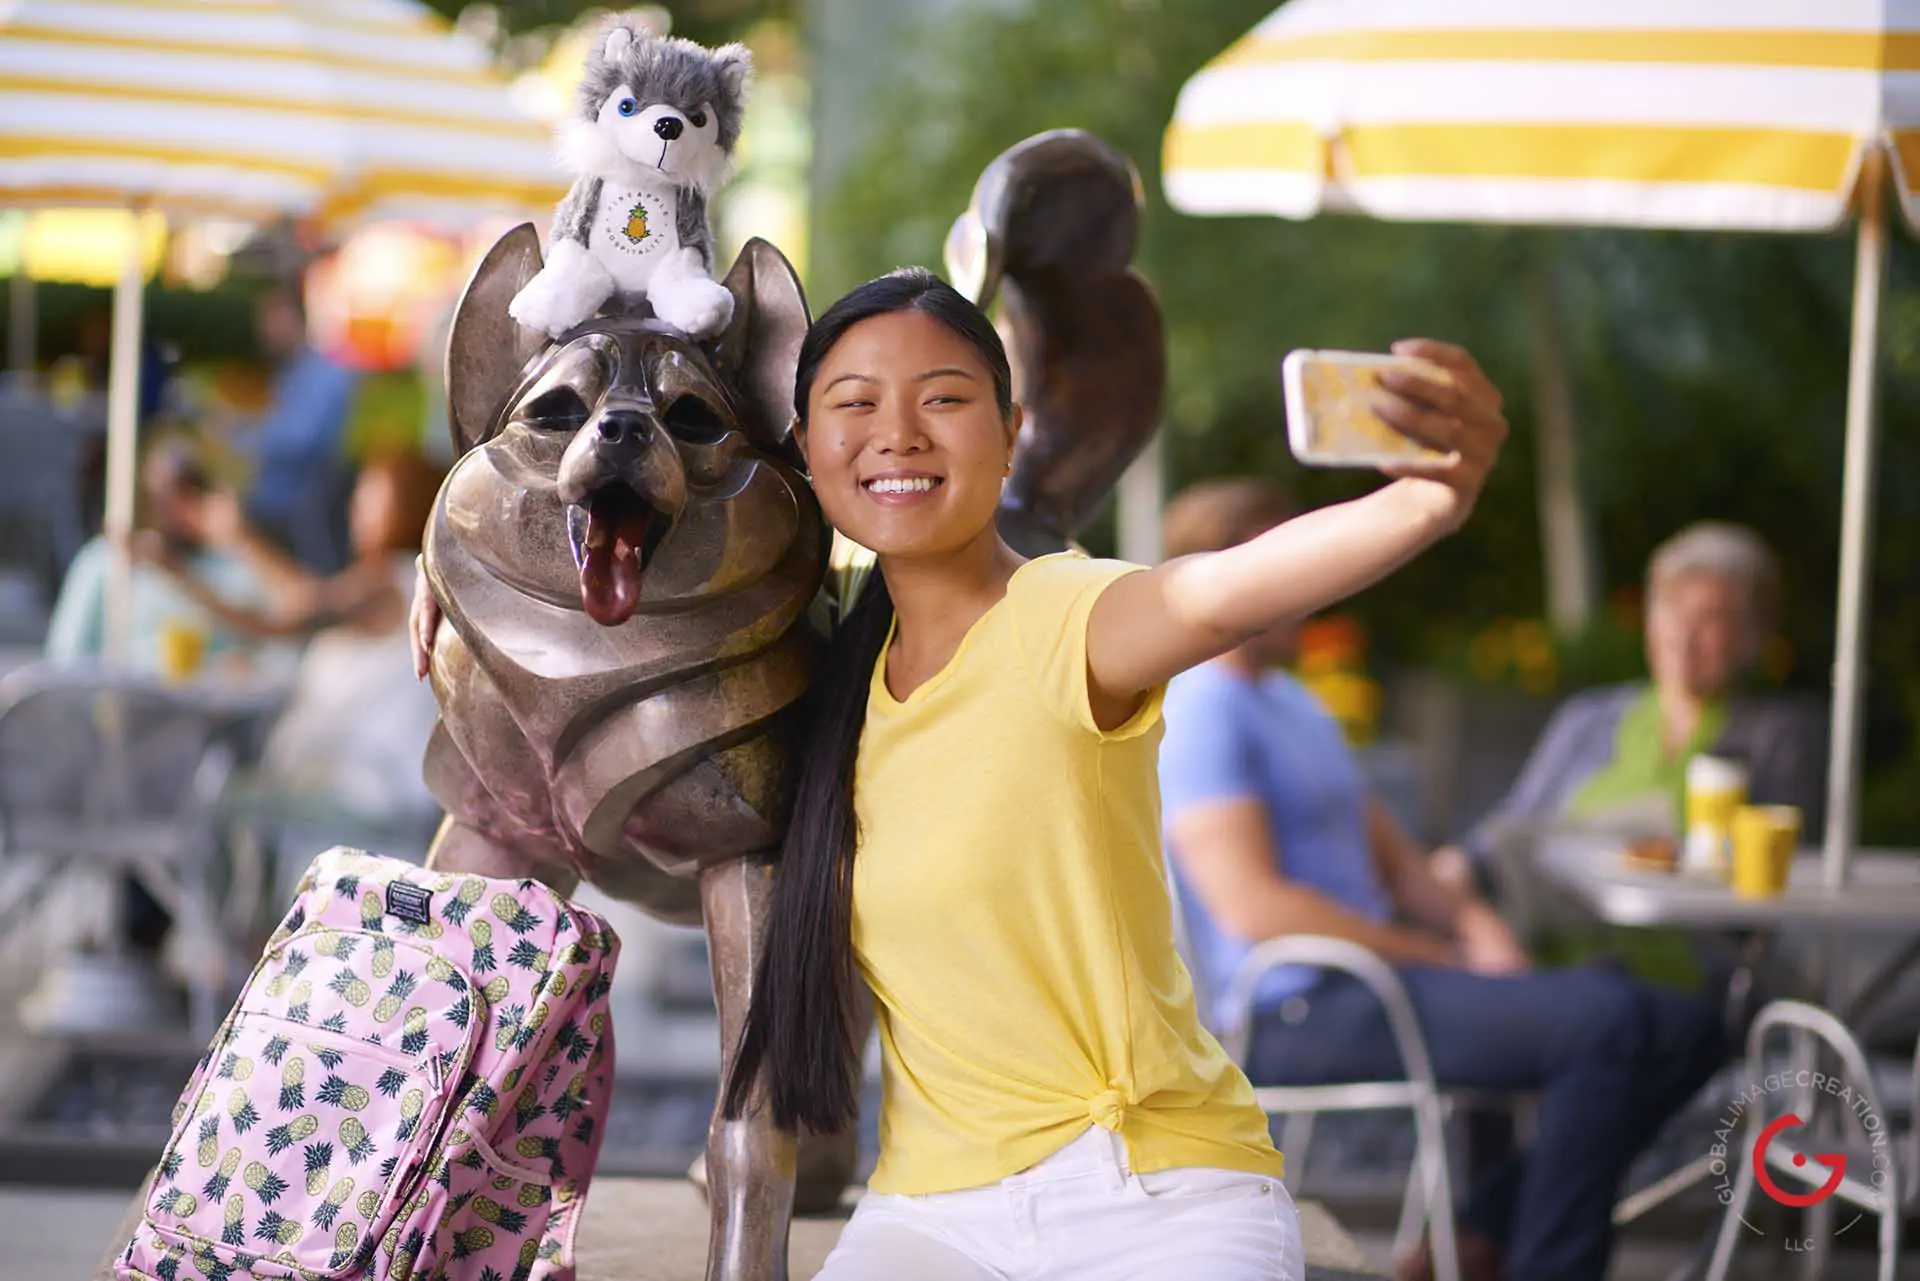 Girl shoots selfie with dog statue and stuffed animal - Professional Photographer Lifestyle Photography Wardrobe Stylist